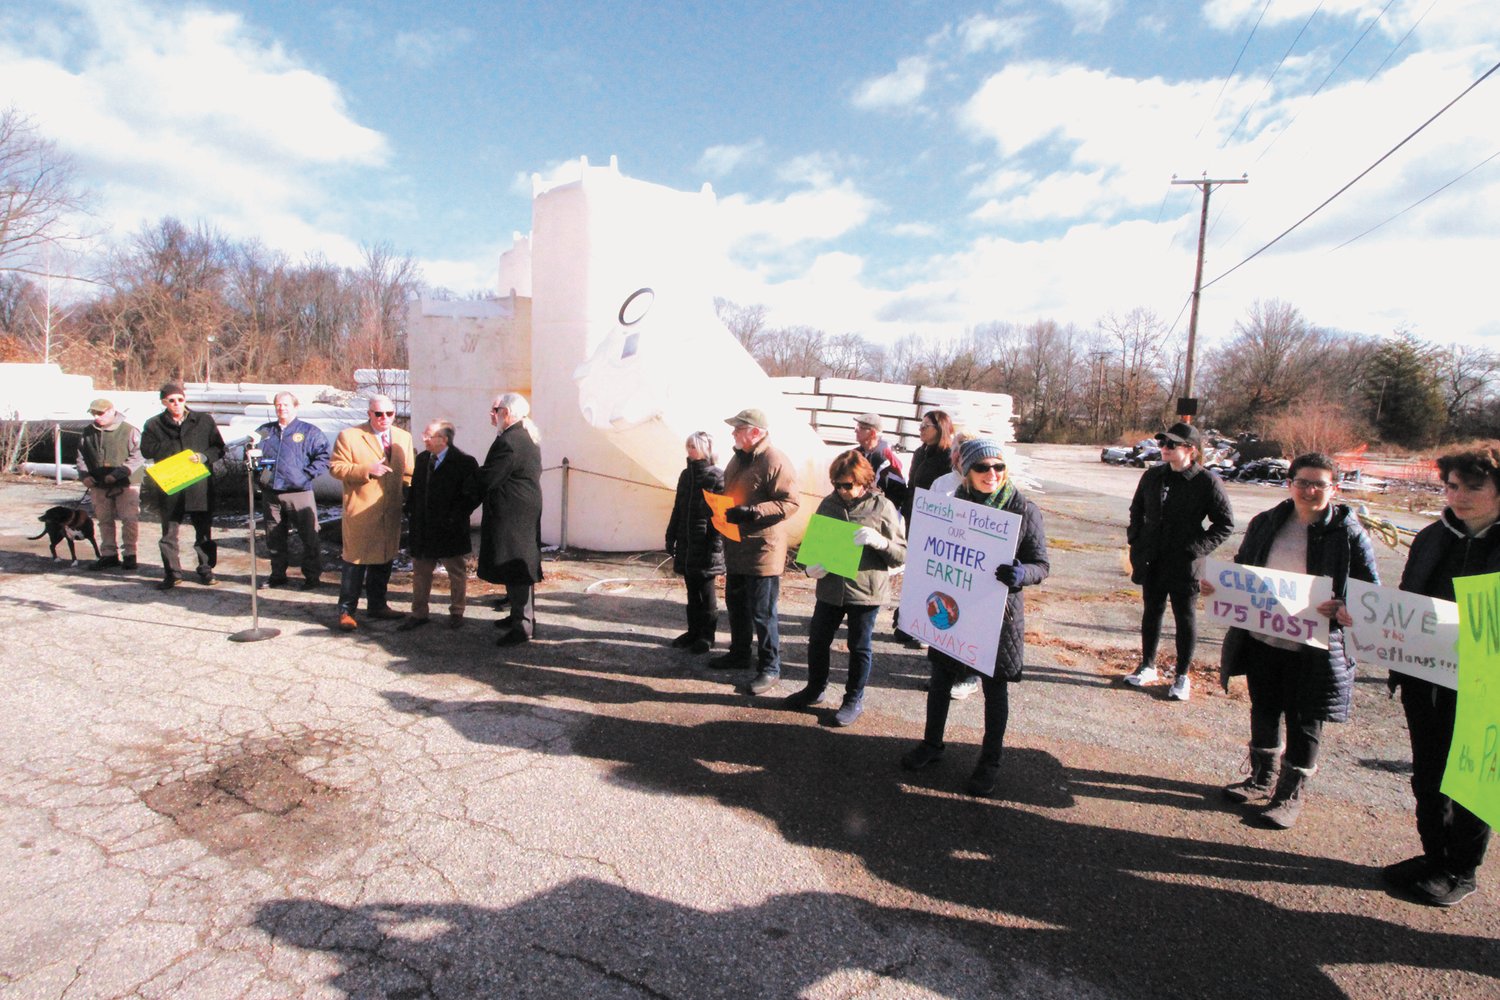 WHAT HAPPENS IF THERE’S A FLOOD? Lined up on Venturi Avenue in Pawtuxet, site of a proposed development that contractors would rent for the storage of equipment, state legislators joined by residents voice concerns over possible flooding of the property and what would become of the PVC pipes and tanks now stored there. (Cranston Herald photo)